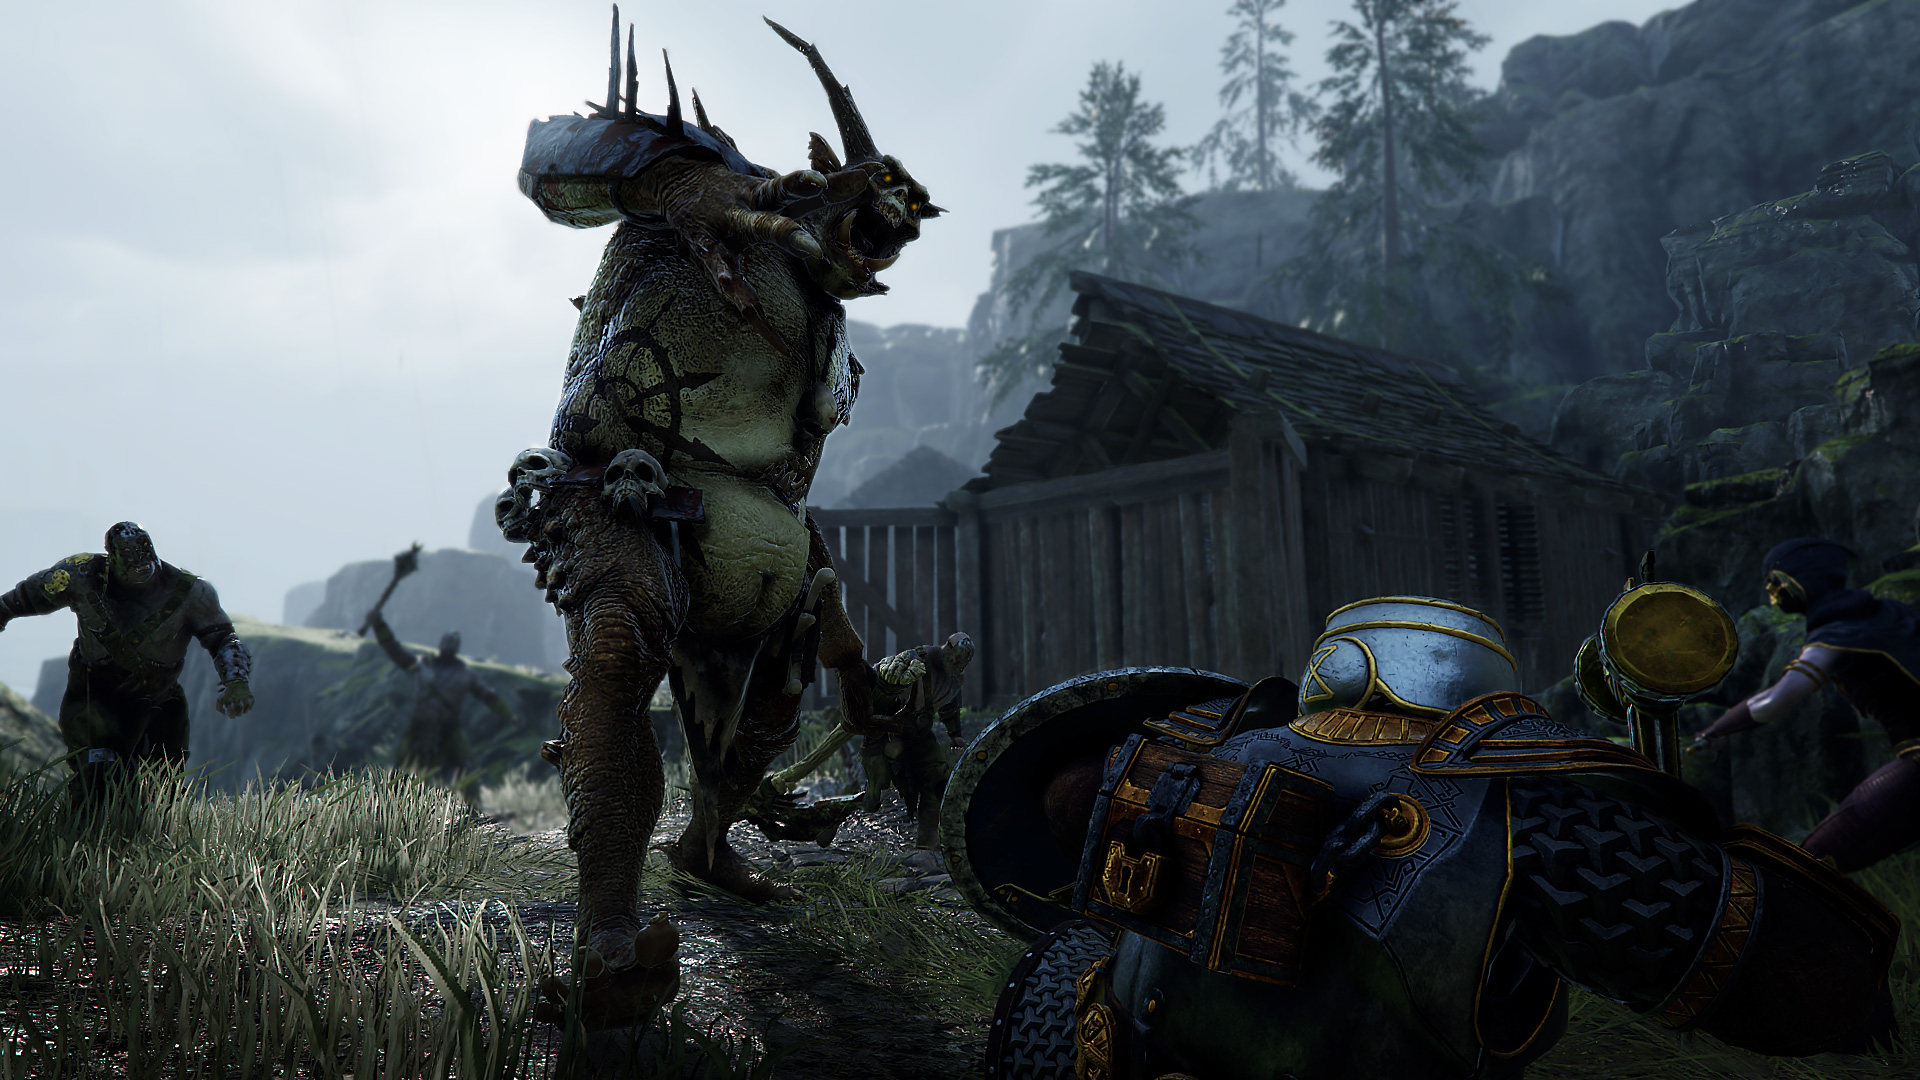 Co Op Action Game Warhammer Vermintide 2 Goes Free For The Weekend Destructoid